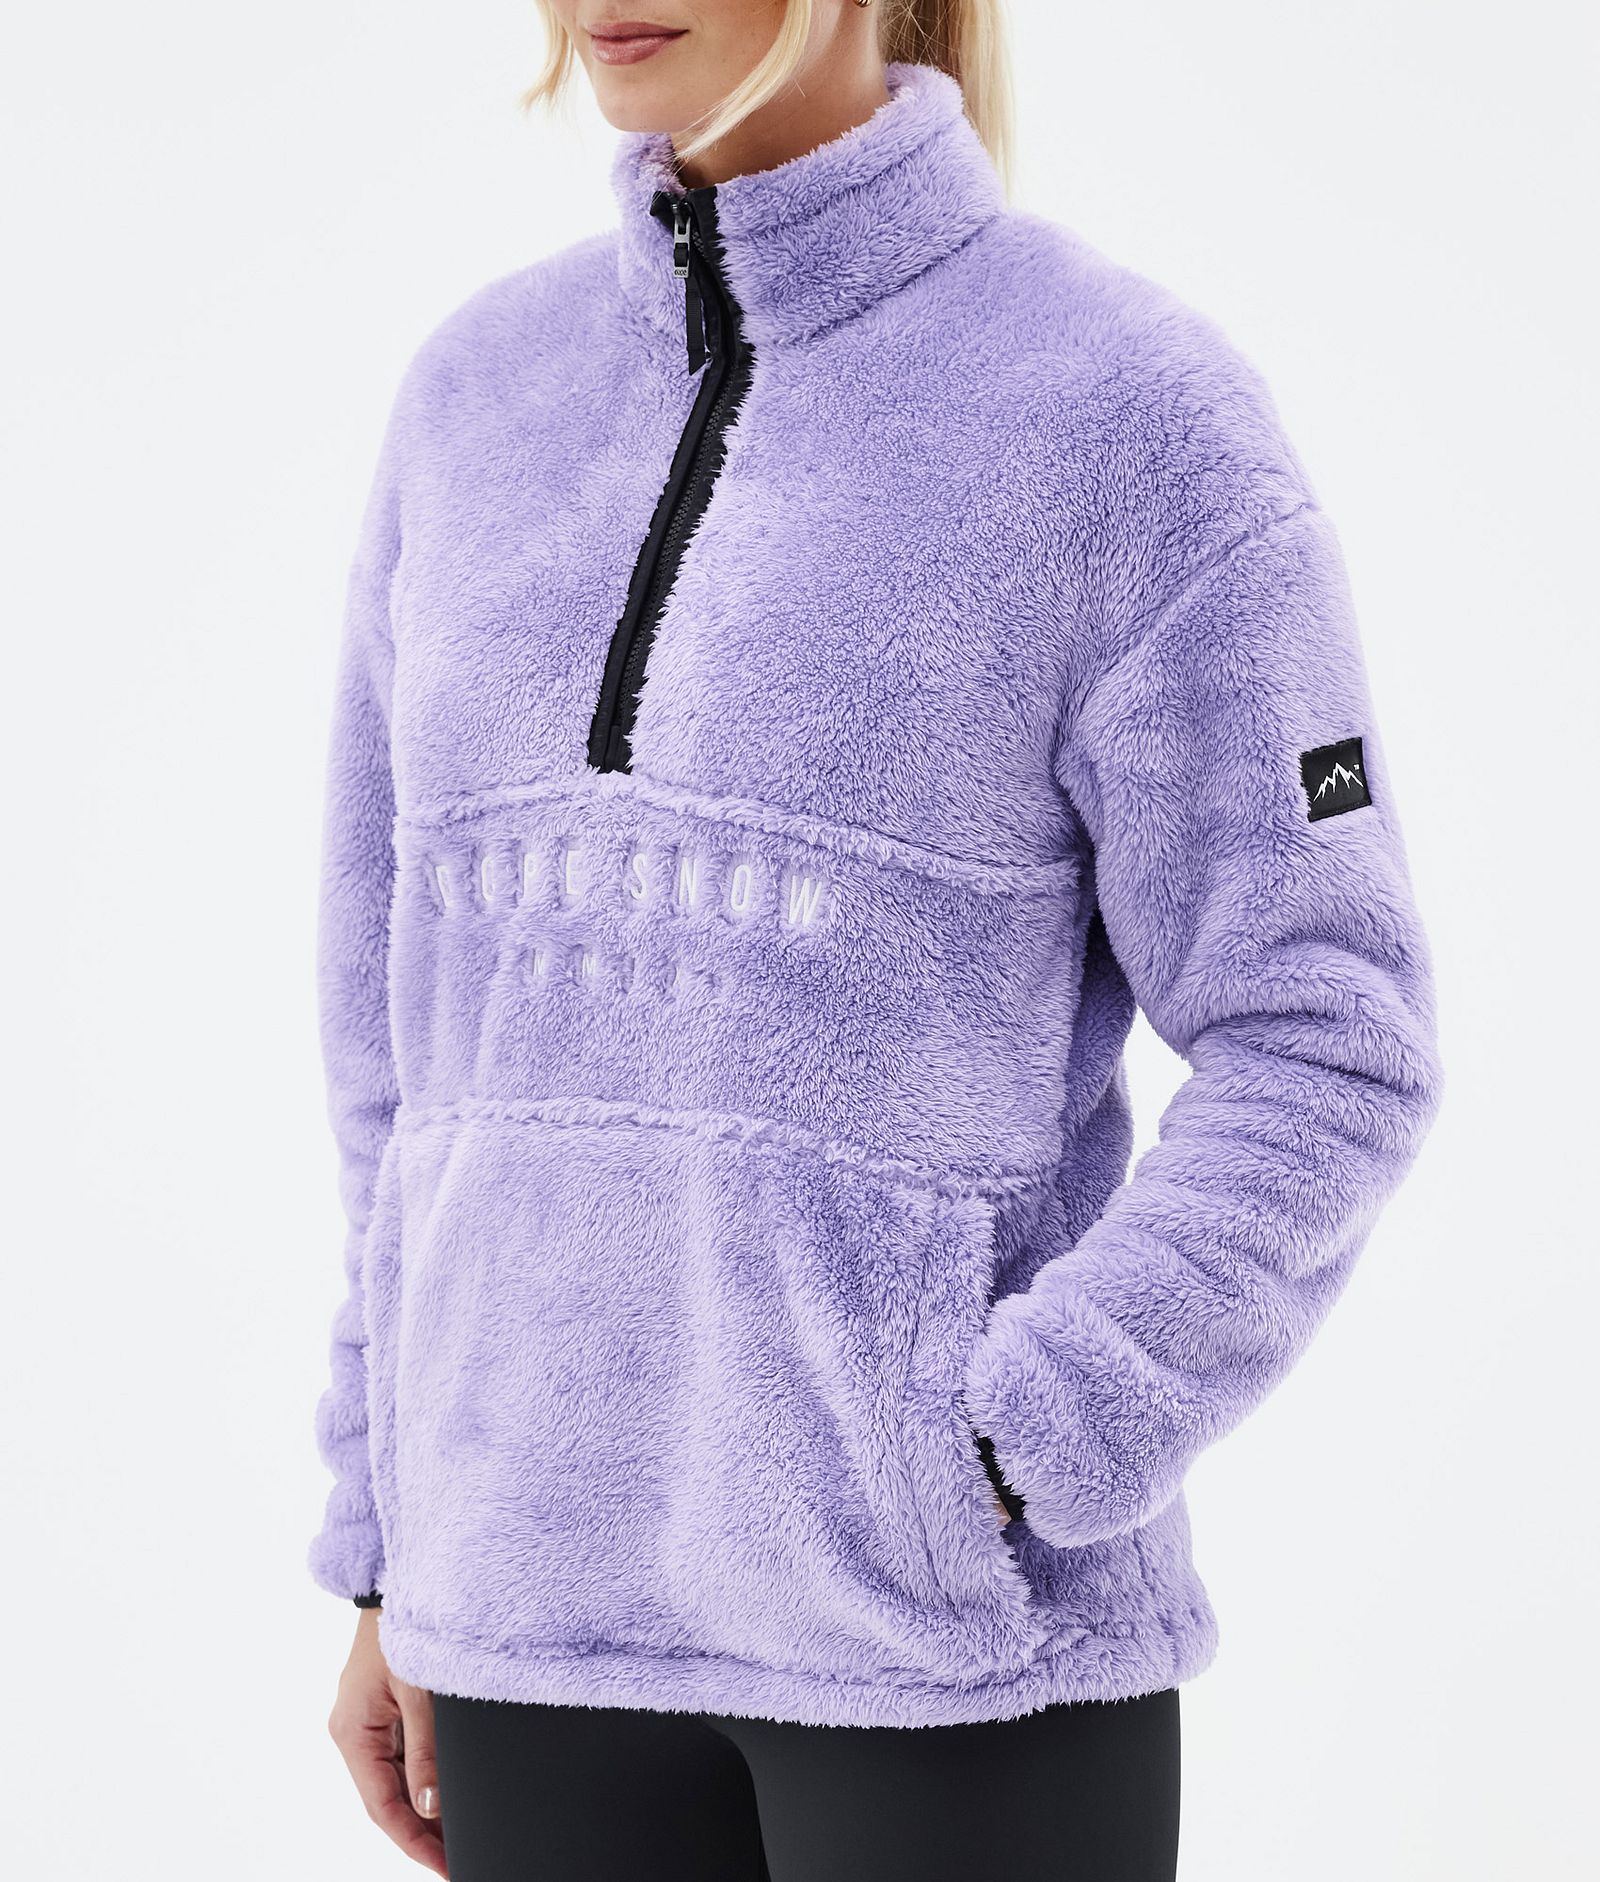 Pile W Sweat Polaire Femme Faded Violet